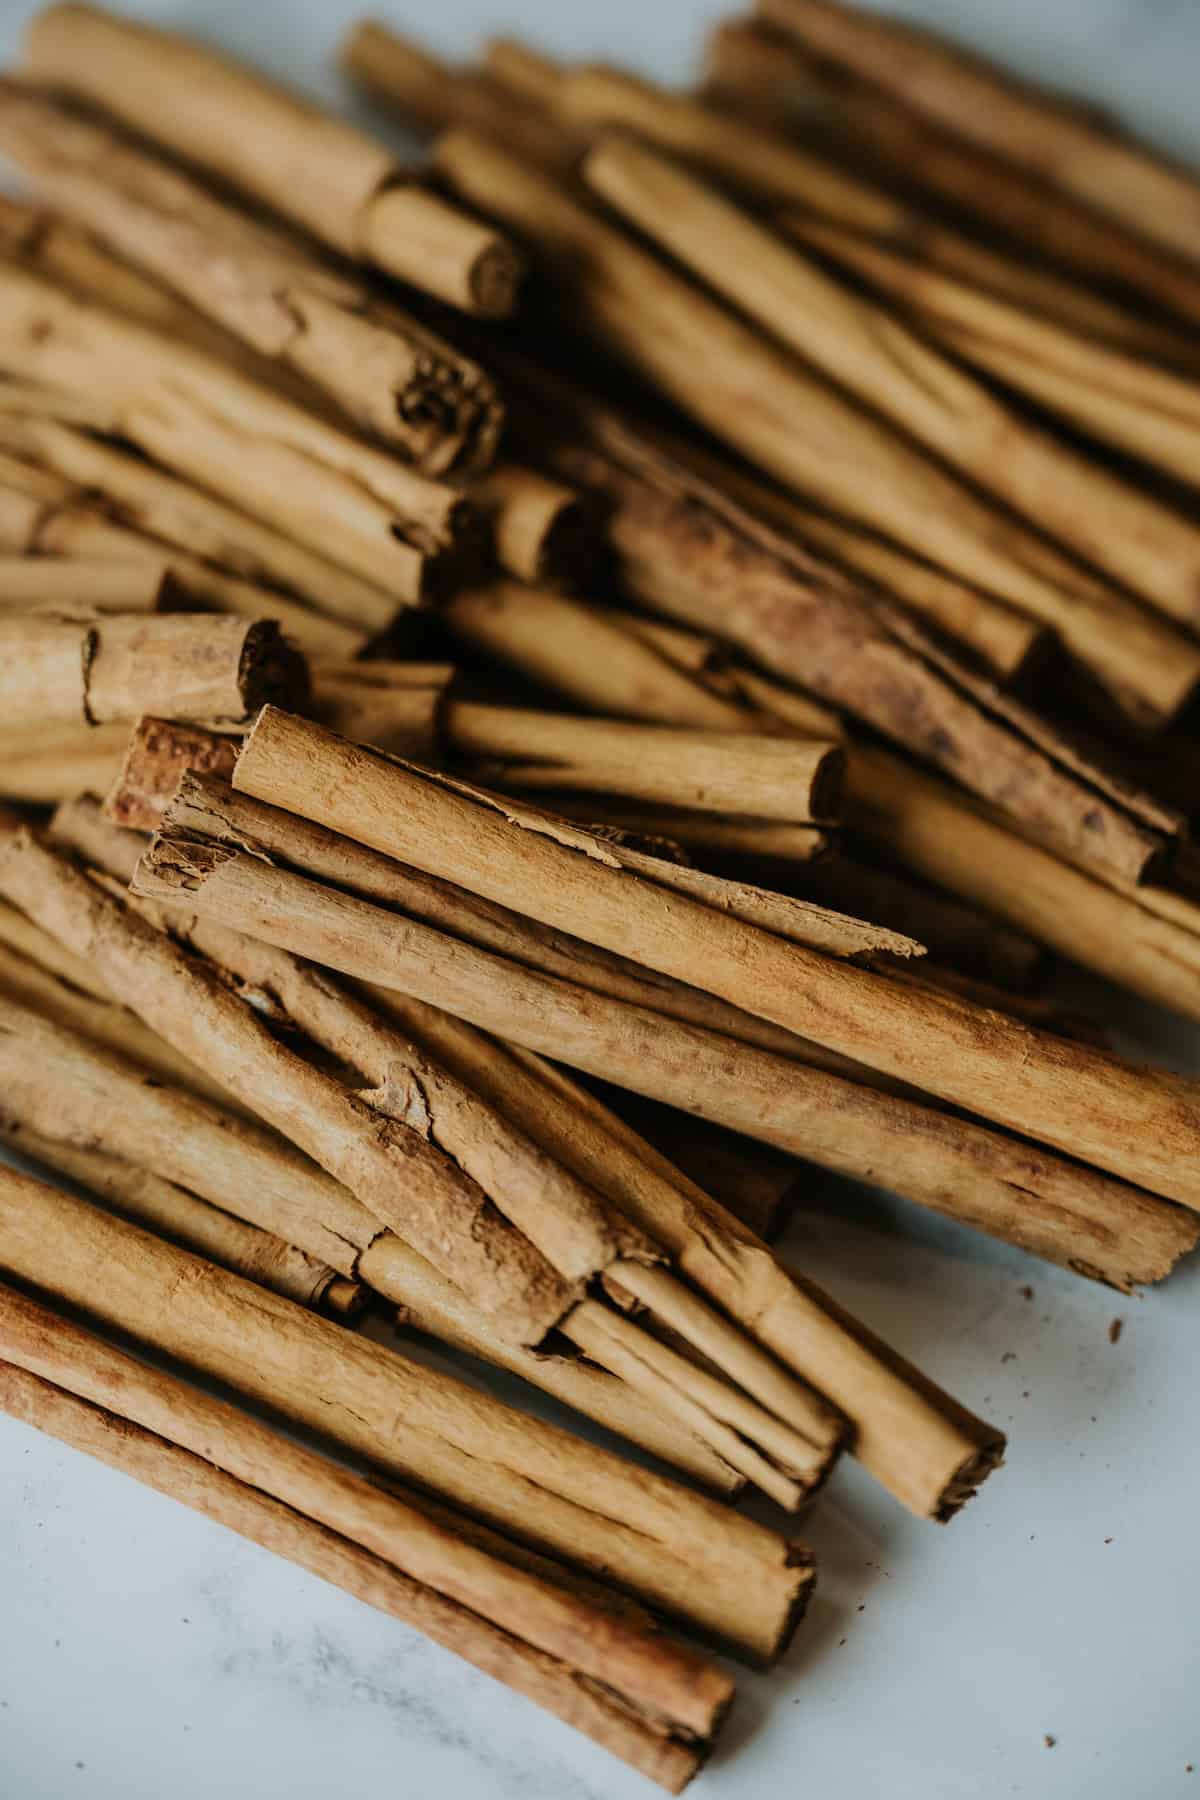 a pile of Mexican cinnamon sticks (also known as canela) on a white table.